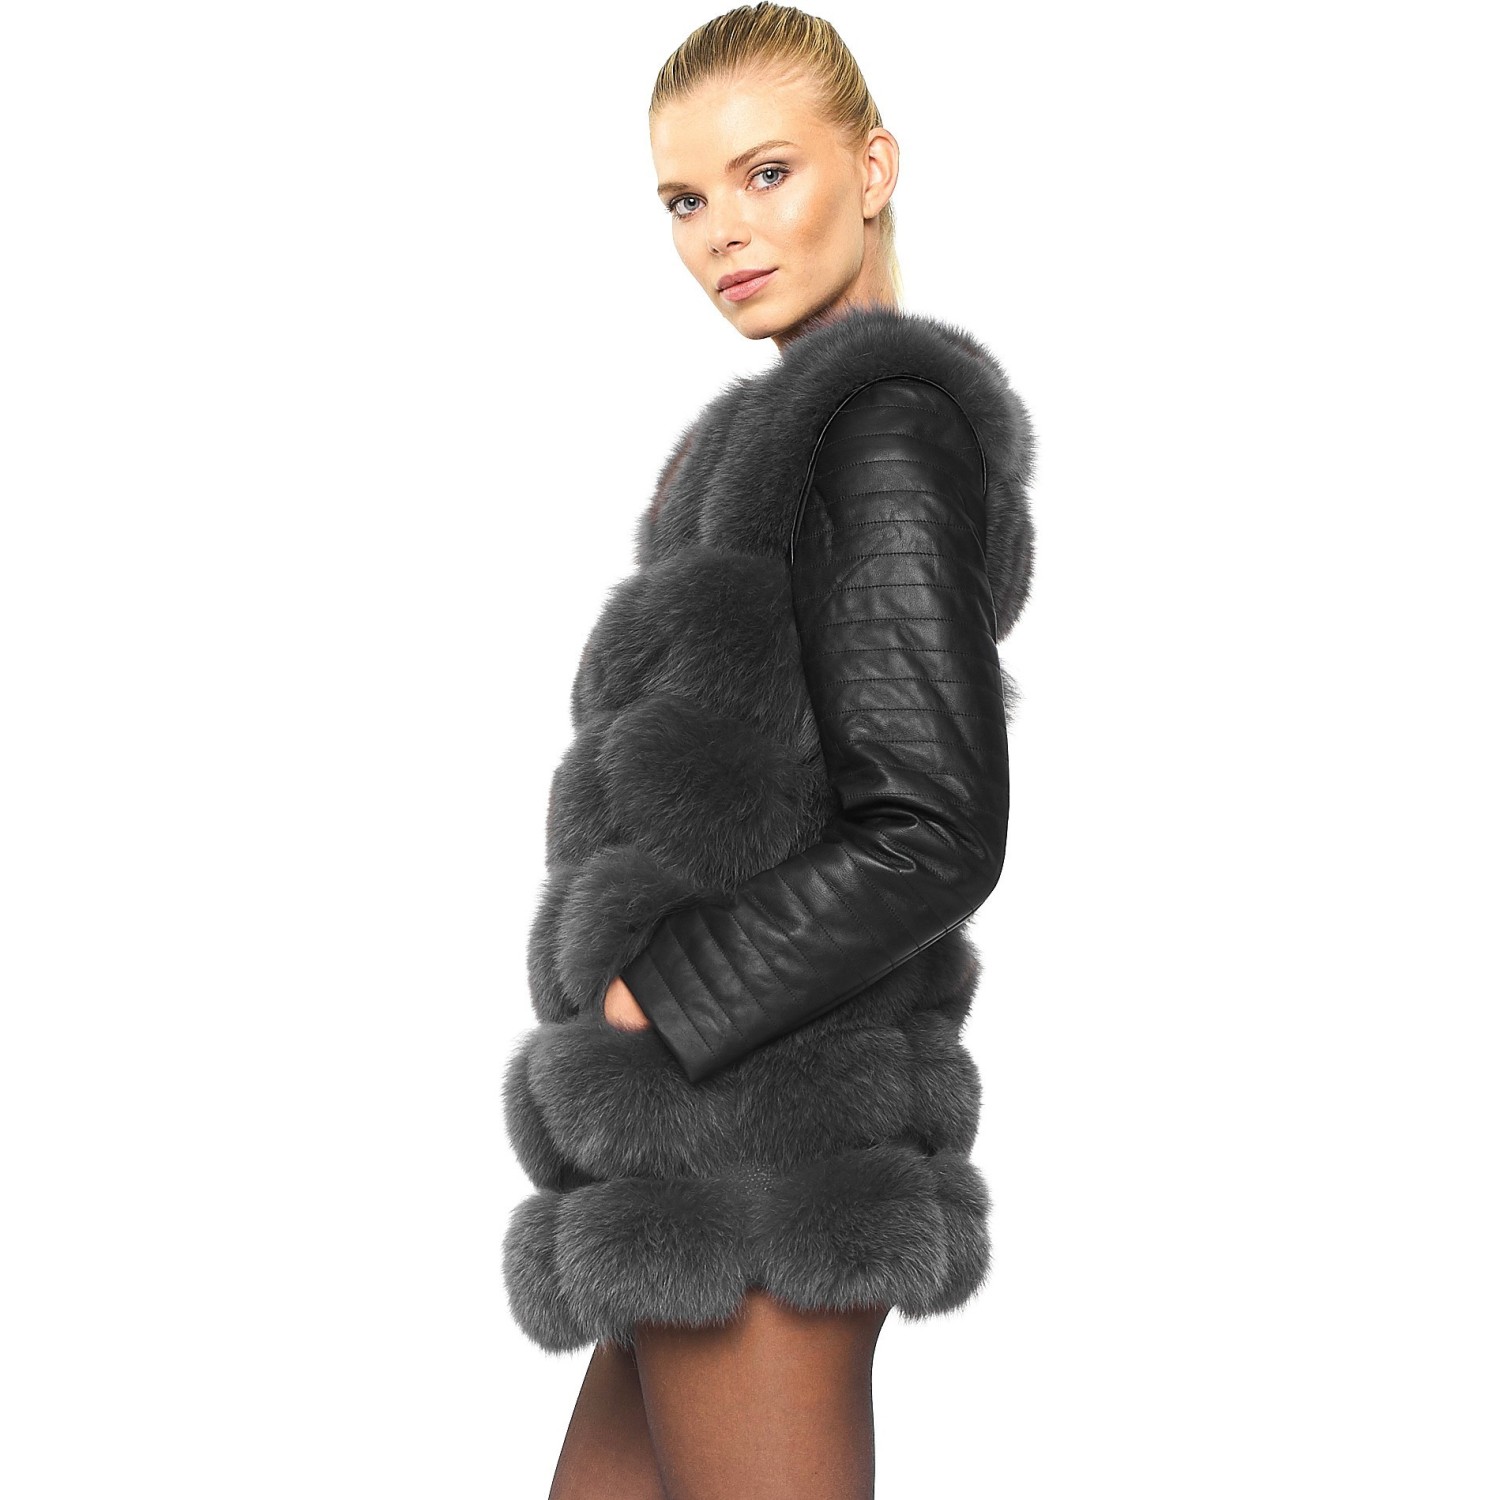 Real Fur Jacket with leather sleeves "VOGUE"